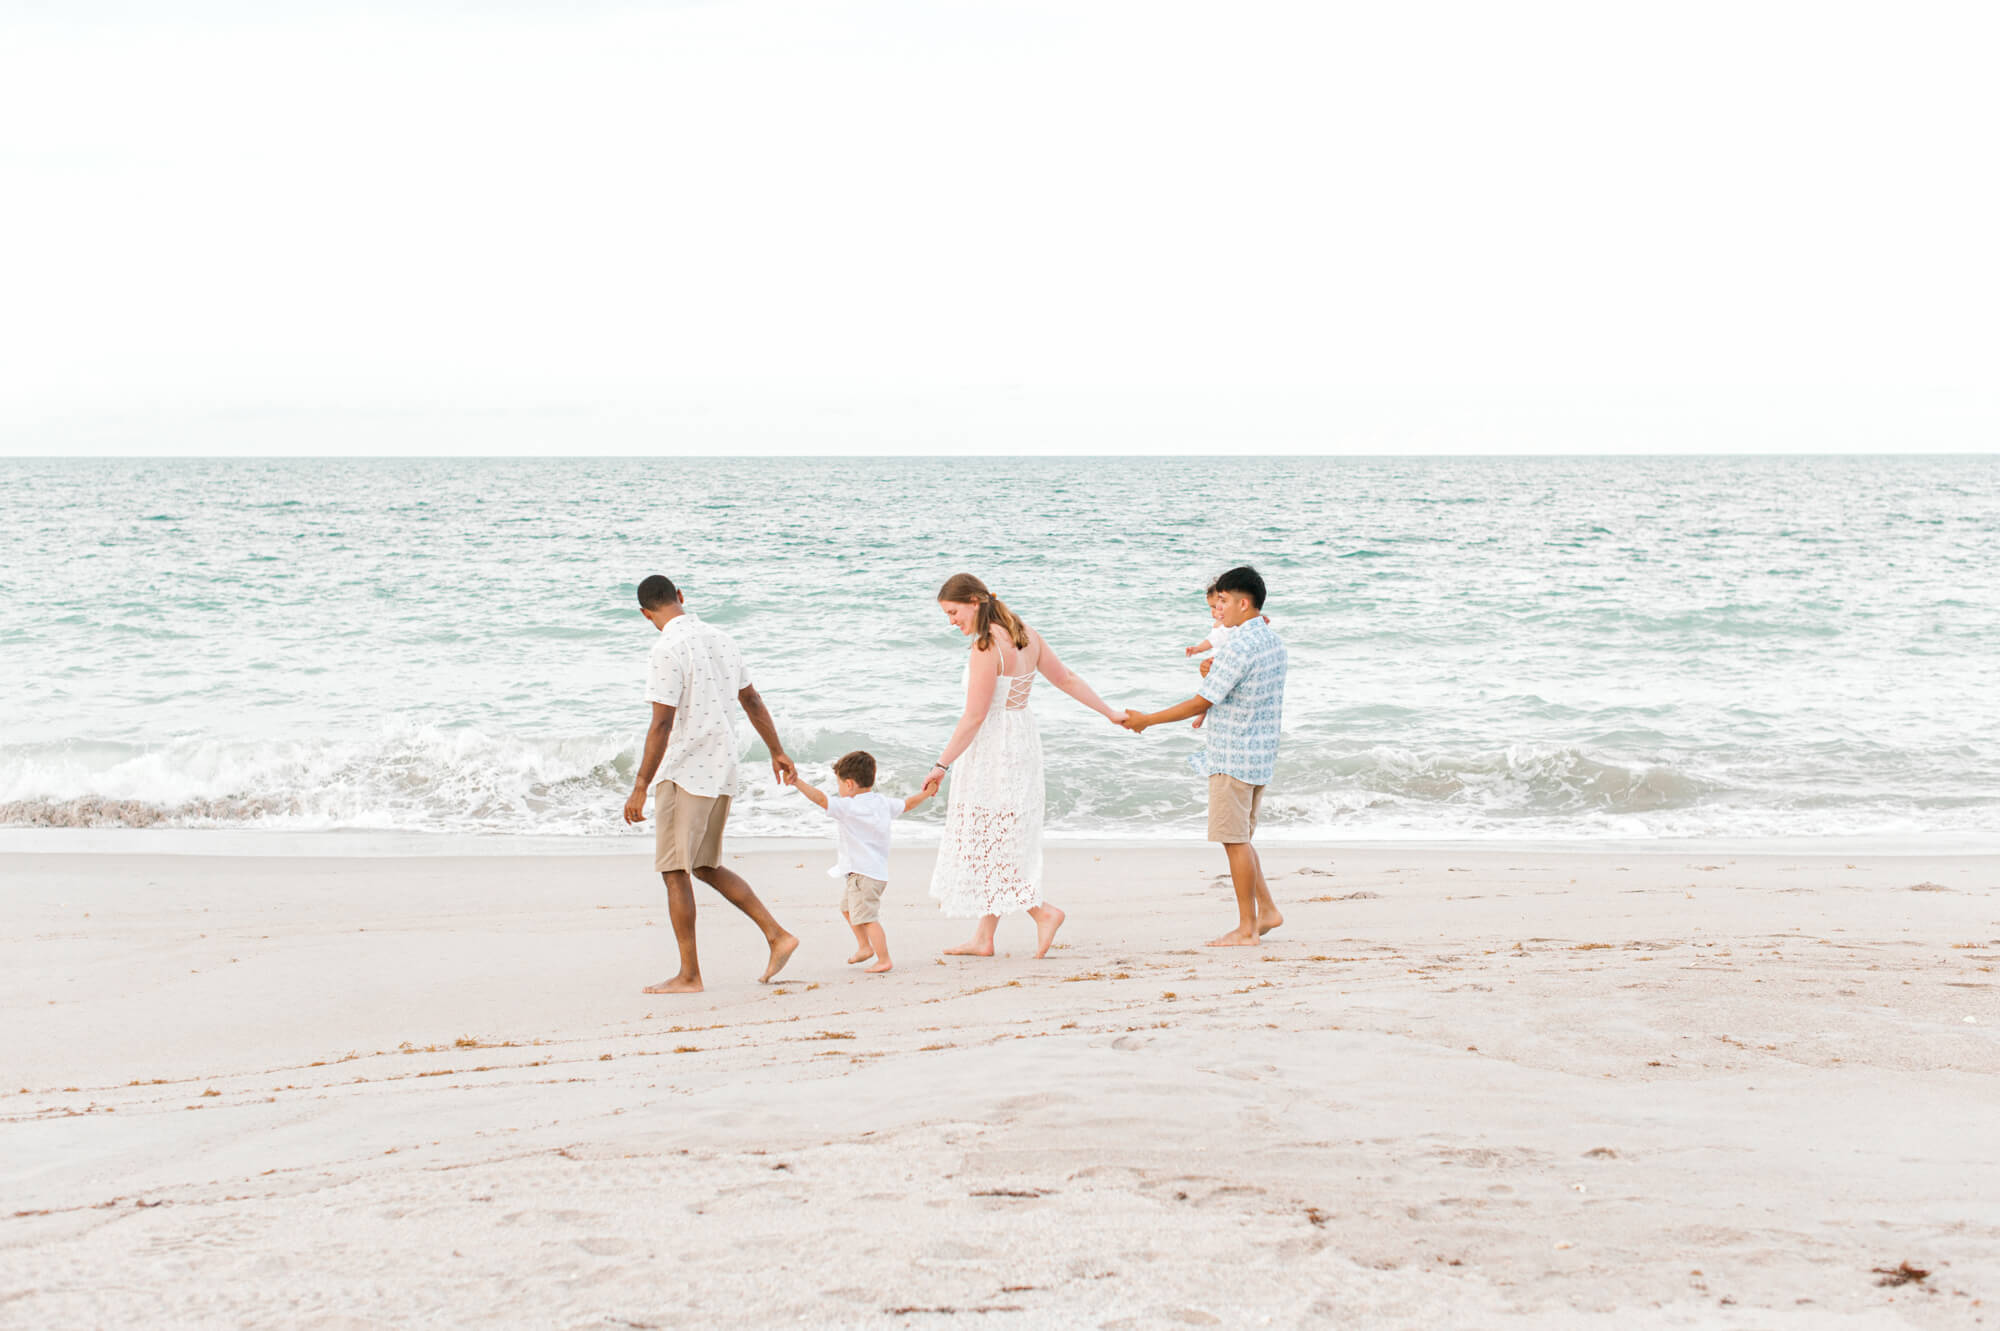 Stroller rentals in Orlando would be perfect for this stunning family walking along the coast of Vero Beach, Florida.